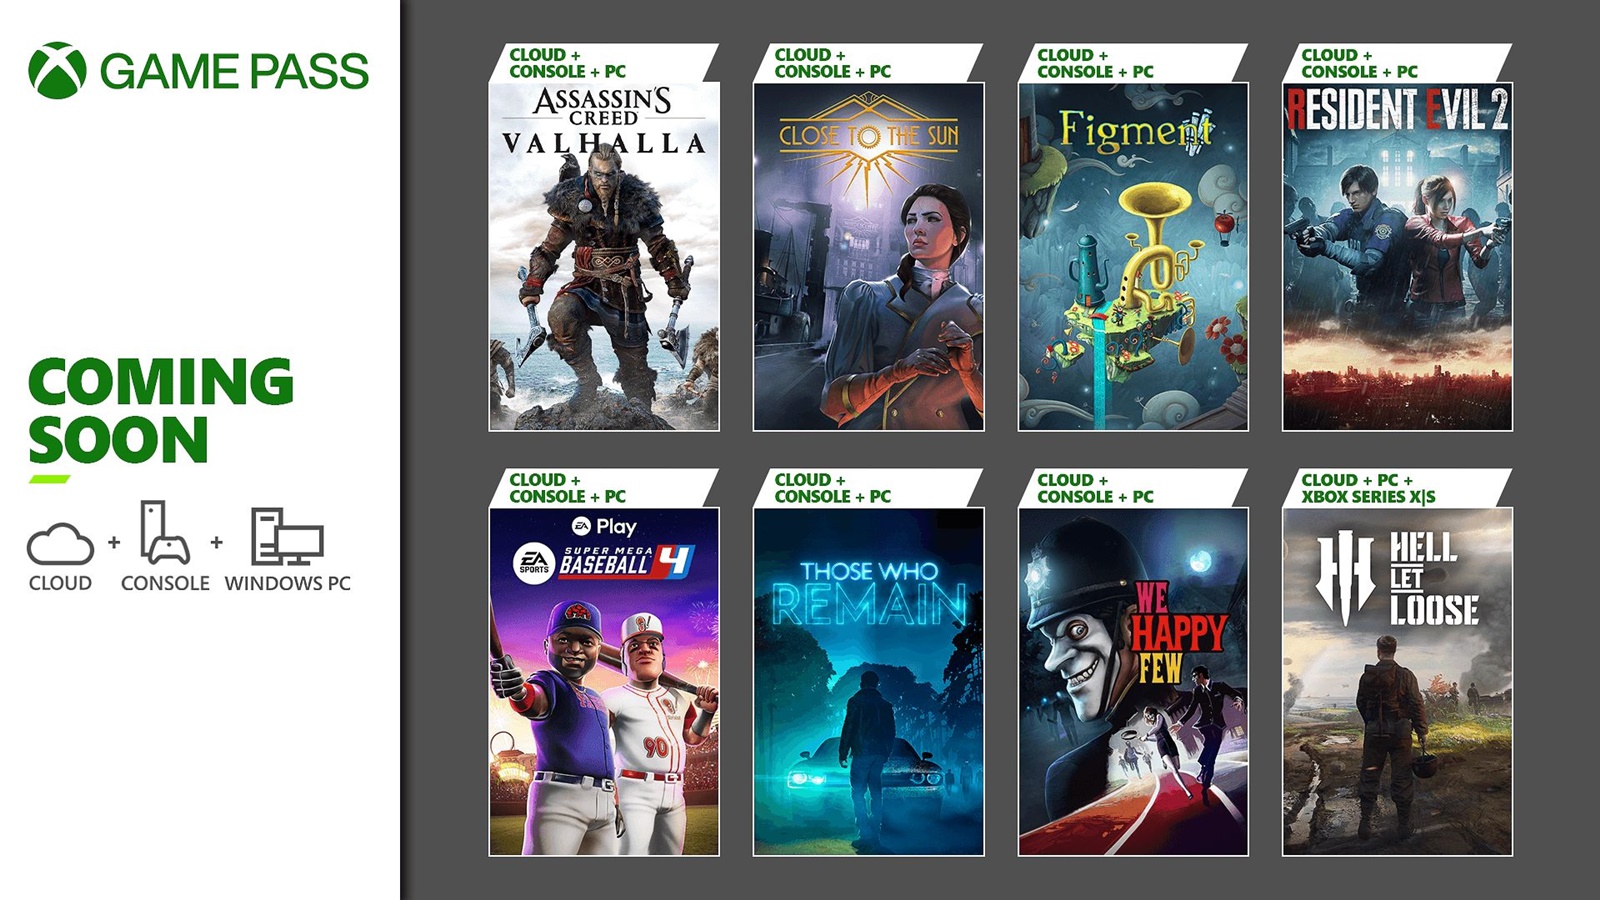 microsoft, android, xbox game pass to soon get assassin’s creed valhalla, resident evil 2 and more, gta 5 going away